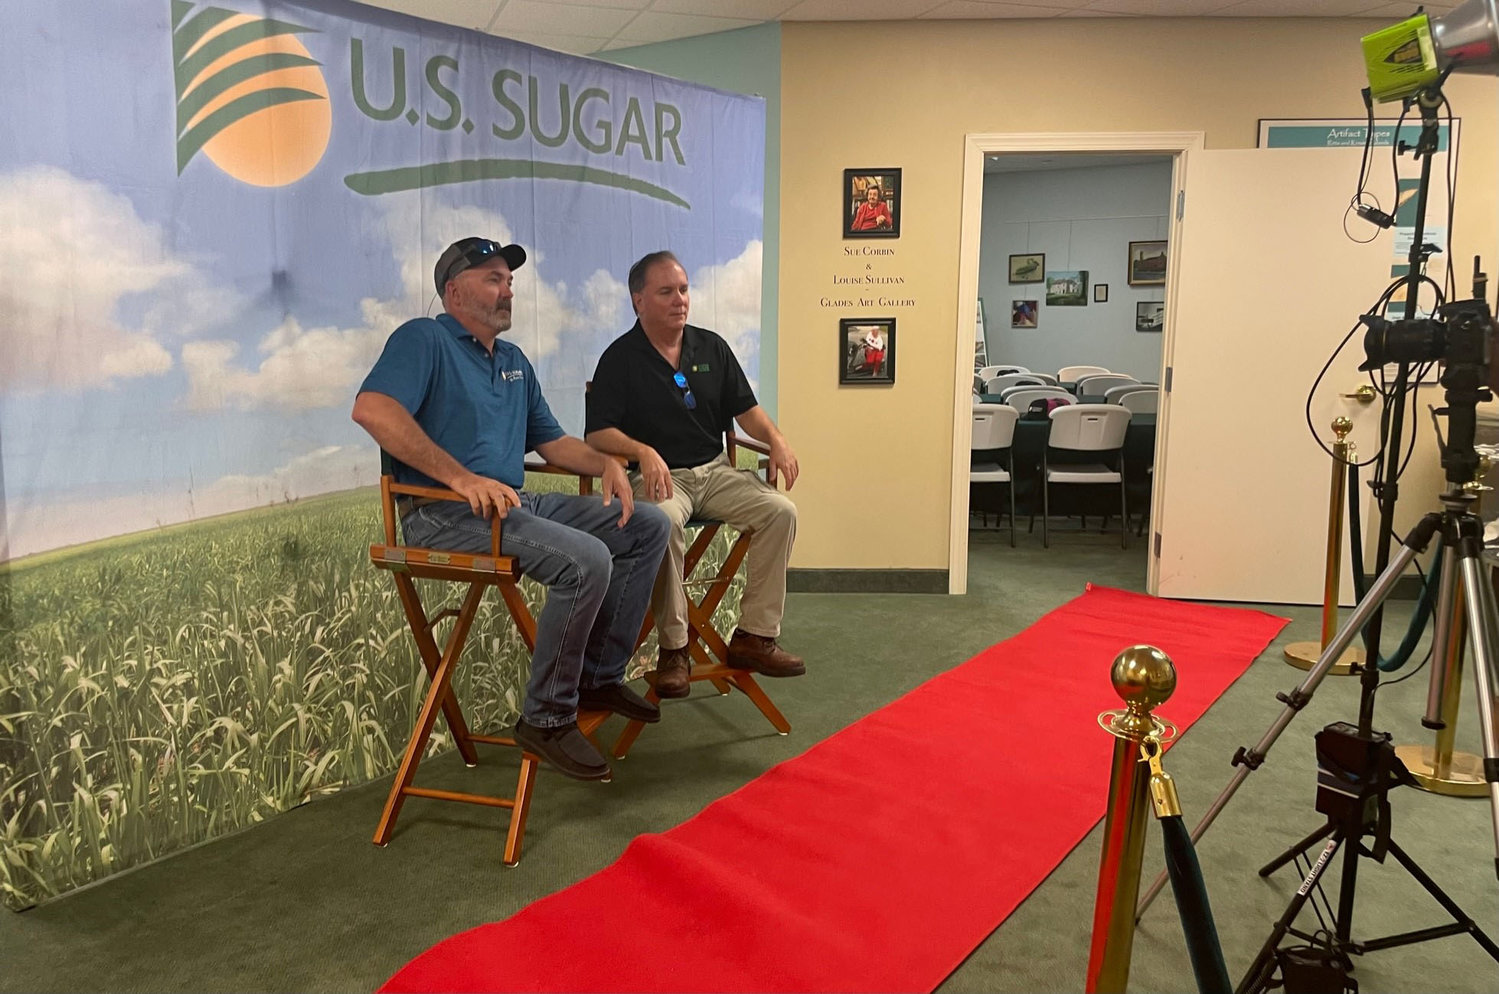 Assistant Refinery Manager of Operations Billy Dyess and Refinery Manager David Pelham are photographed on the red carpet before the How America Works American-made sugar premiere.